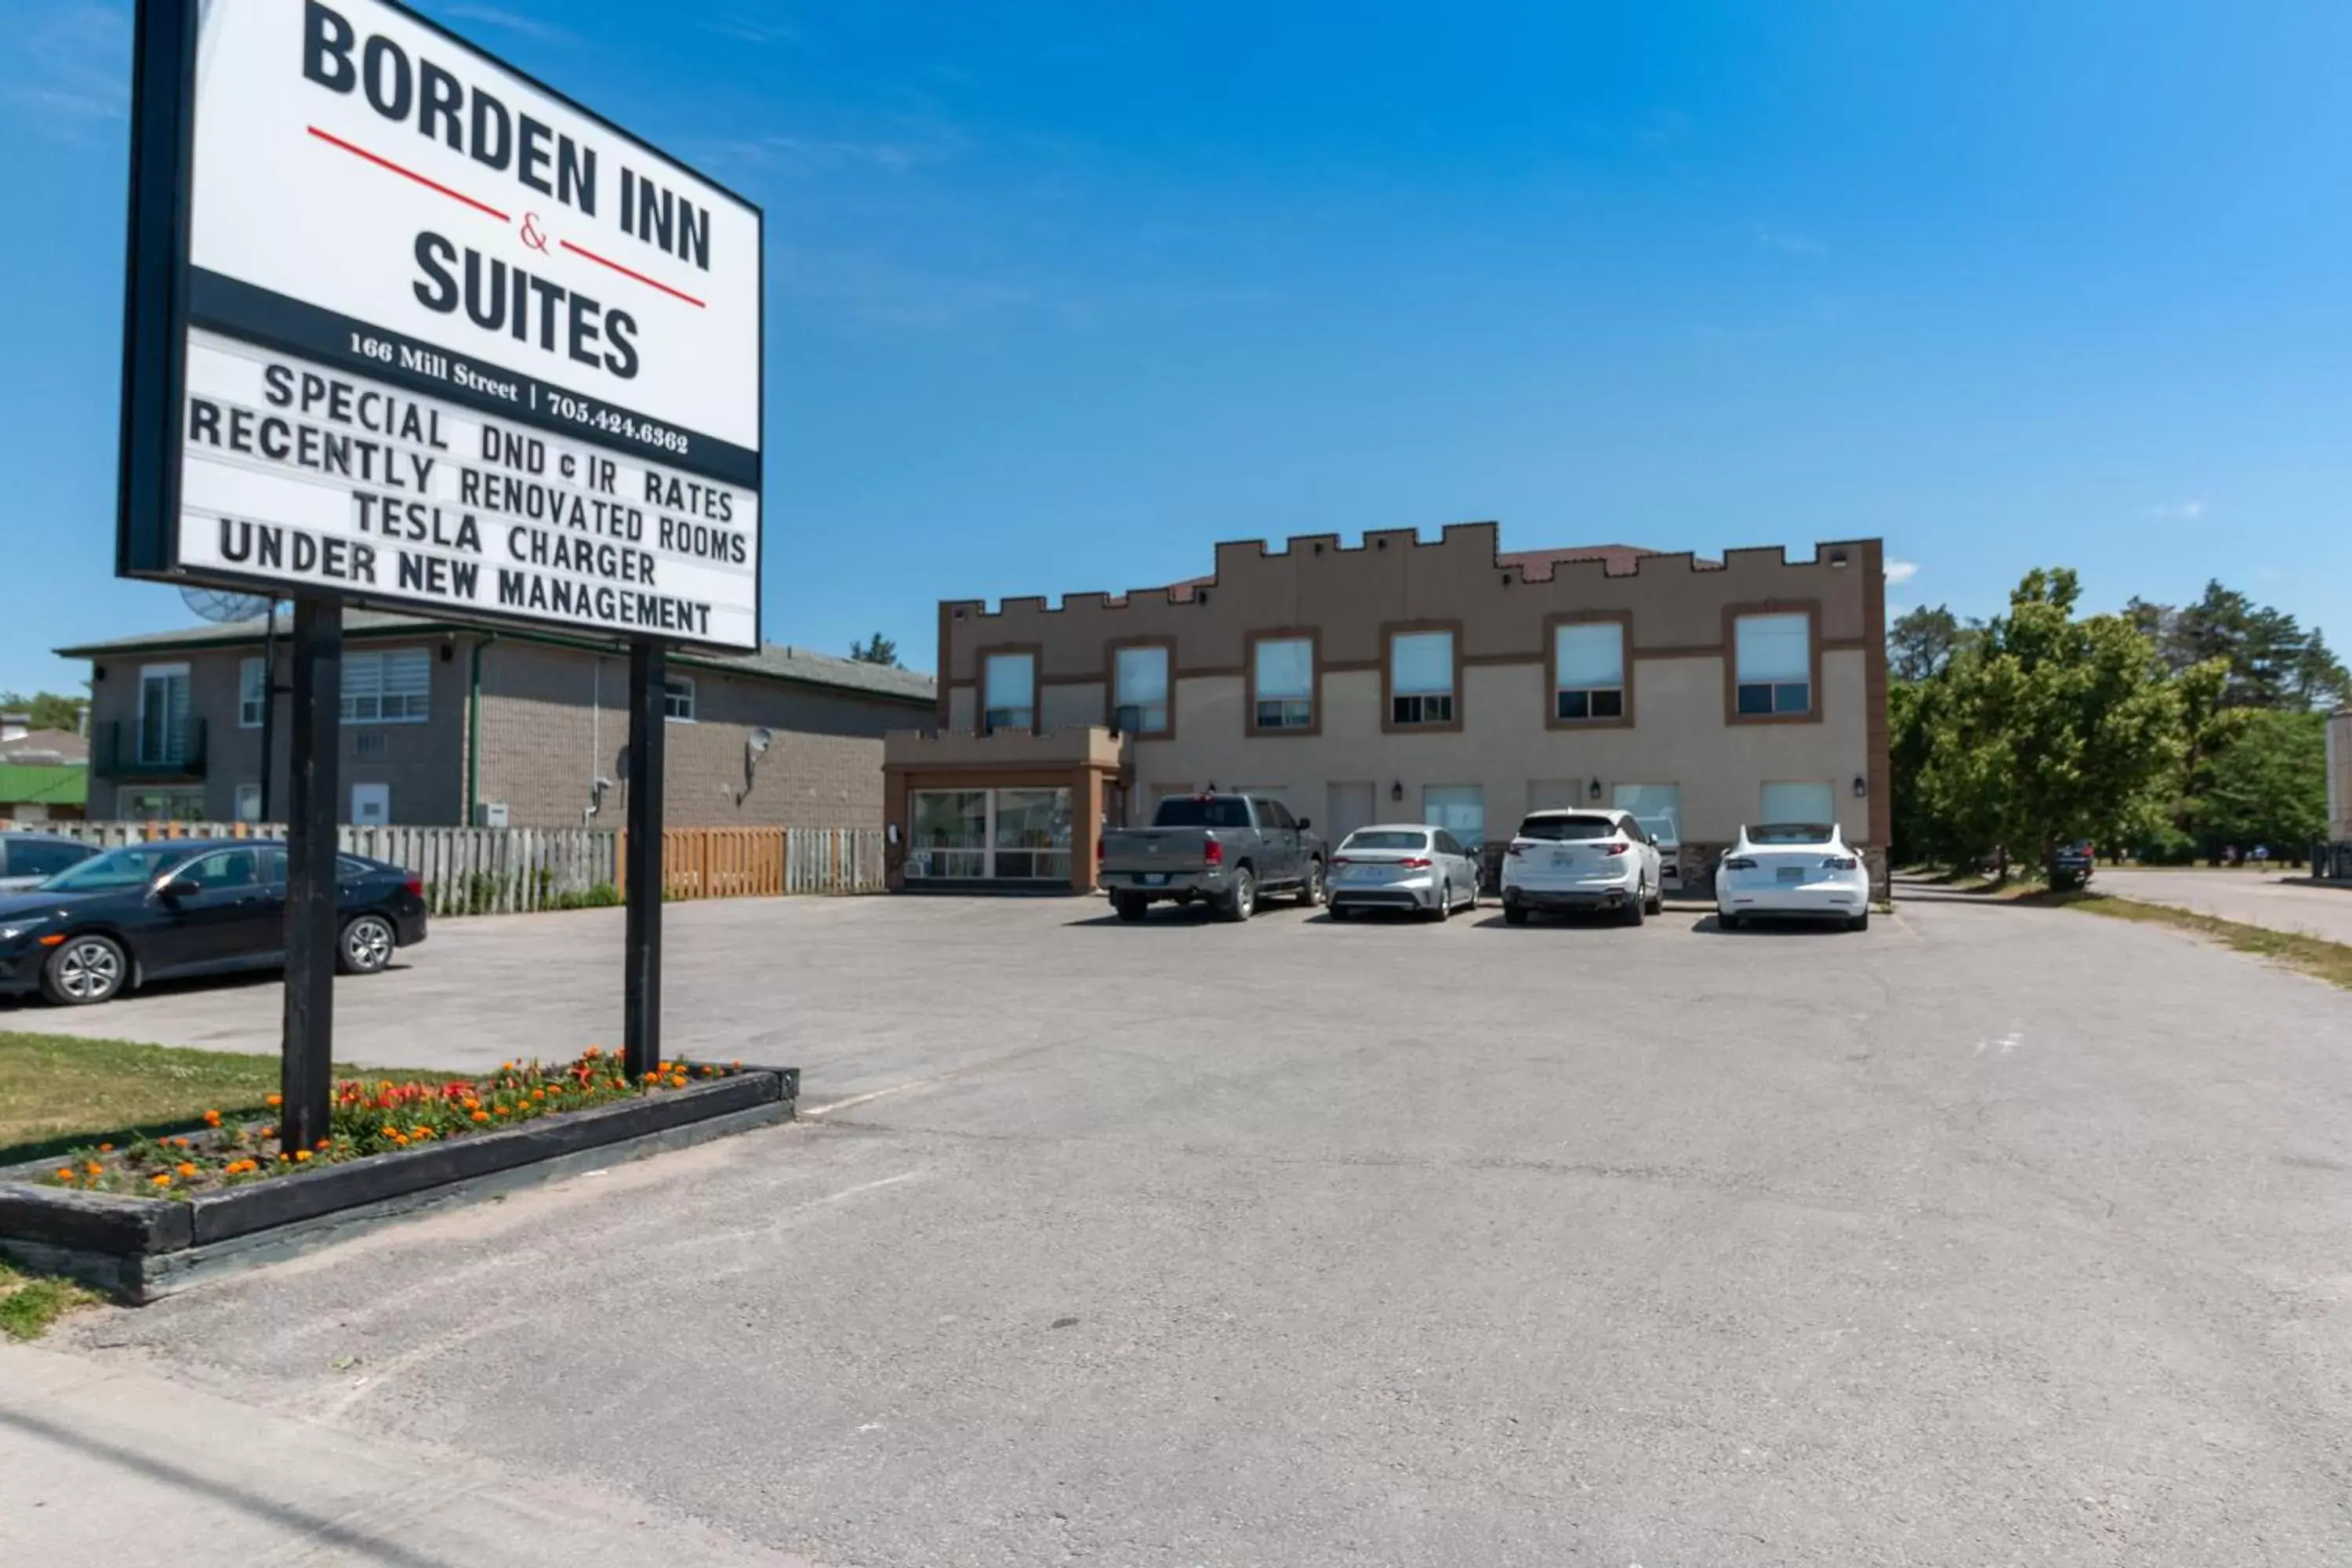 Property Building in Borden Inn and Suites